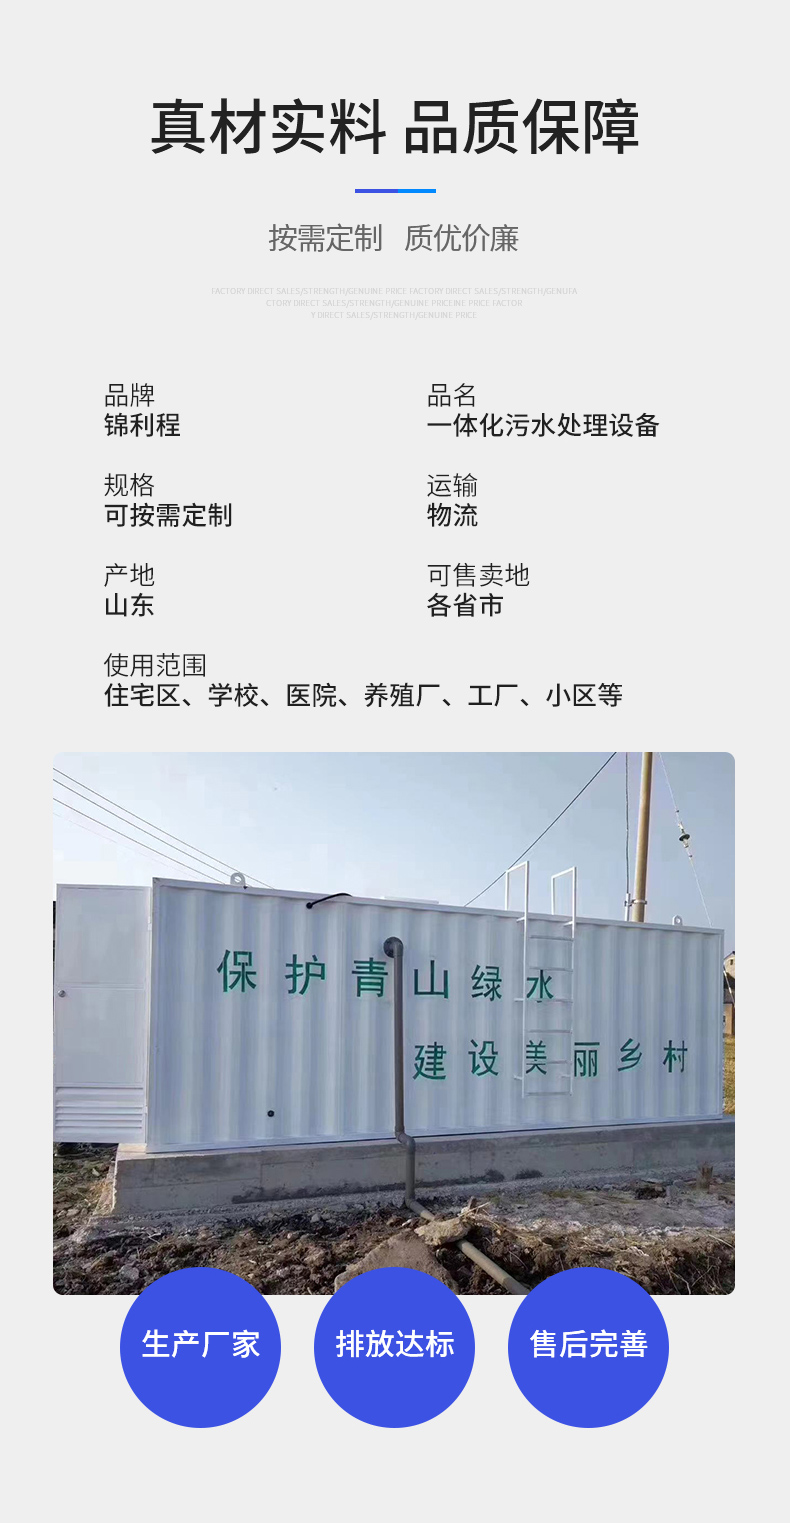 Aquaculture Water purification system Koi pond fish pond aquaculture wastewater treatment equipment up to standard discharge